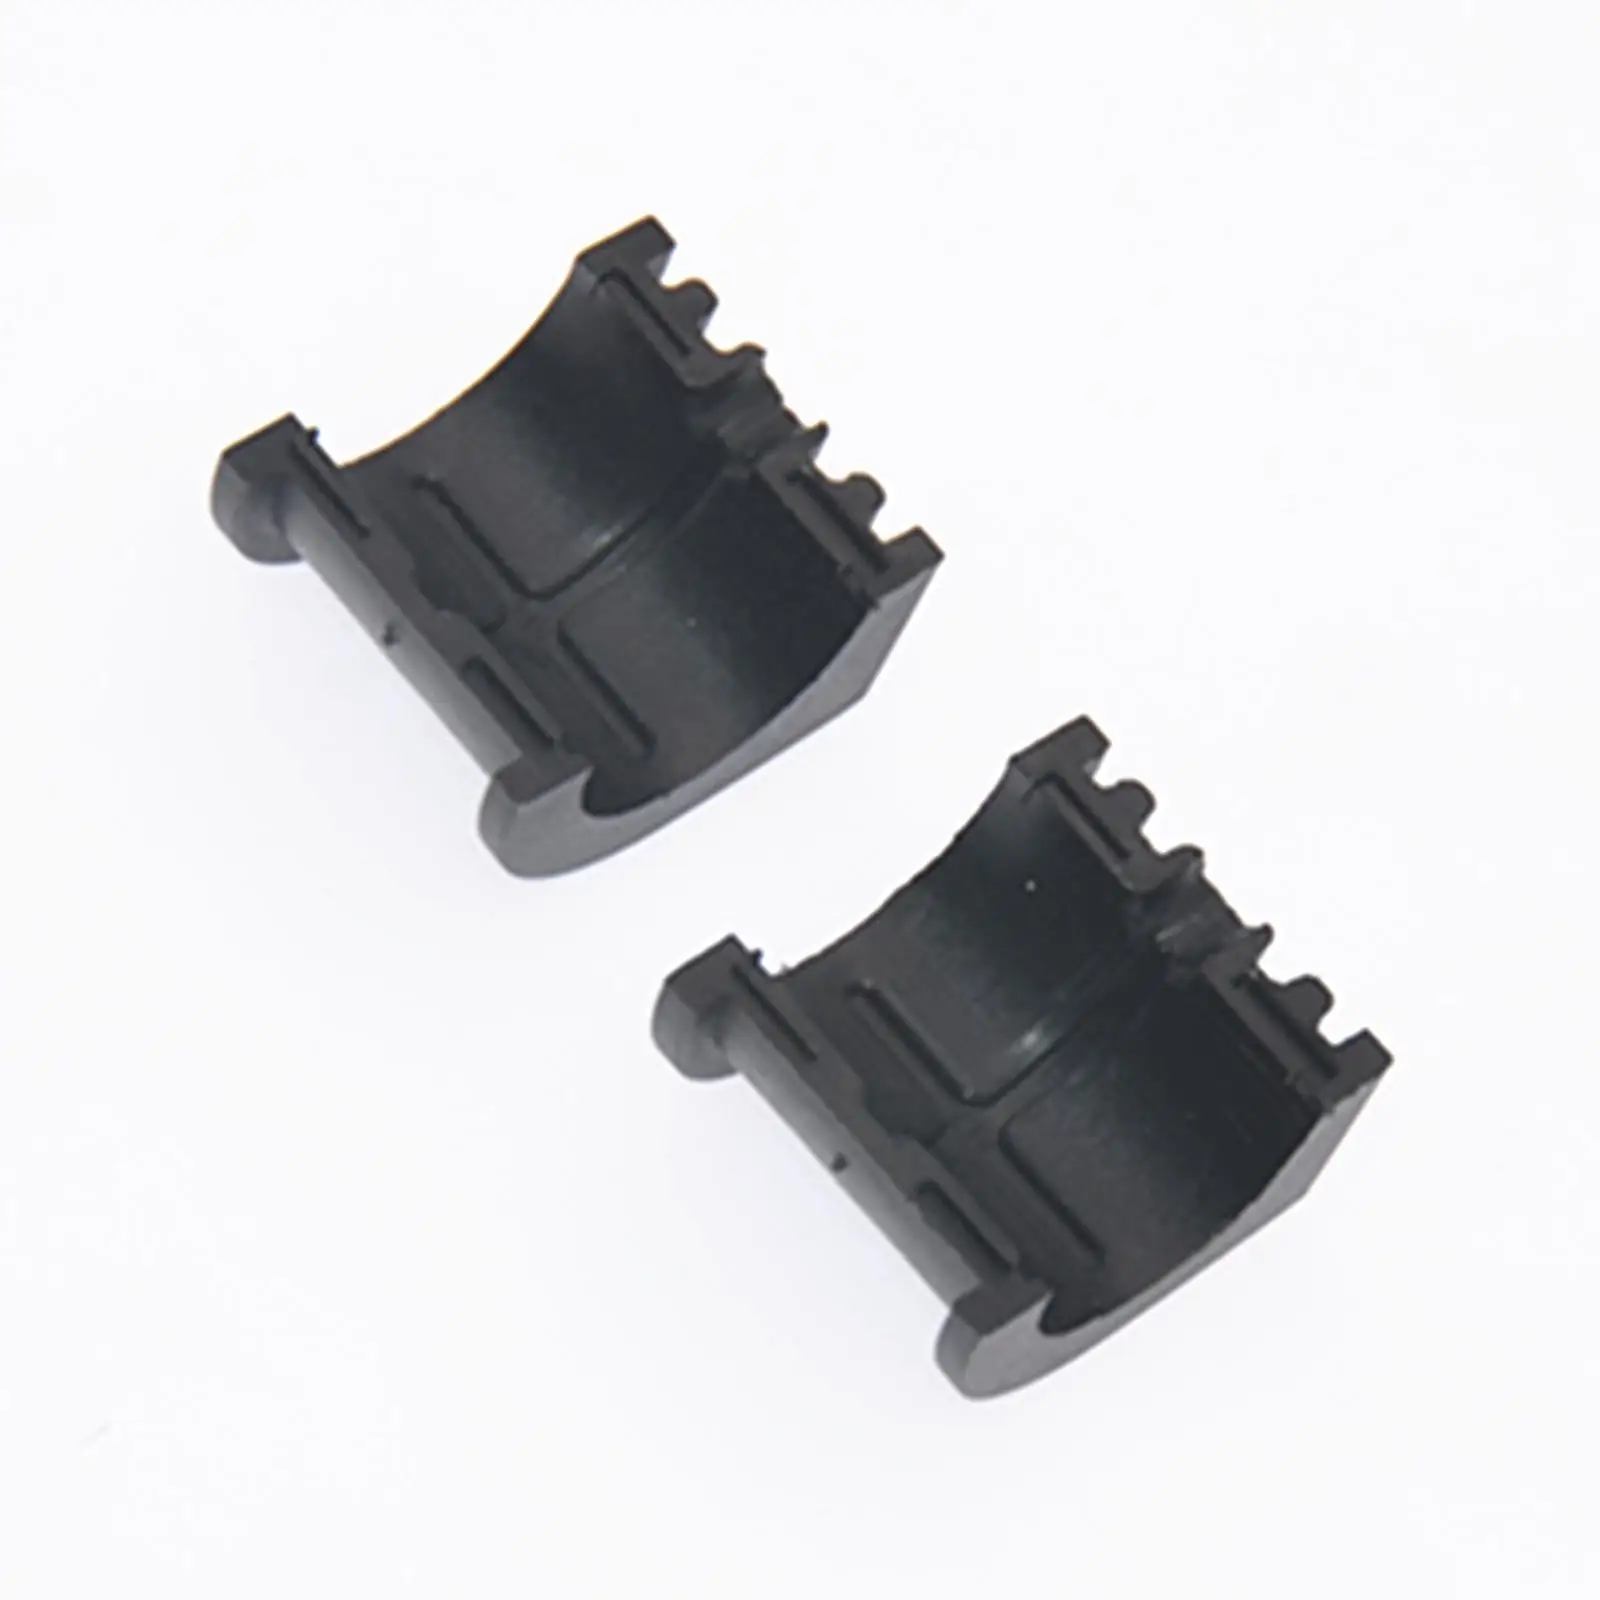 2Pcs Auto Upper Steering Bushing 5439731 5438903 for Polaris Sportsman 300 800 Replace Spare Parts Accessory